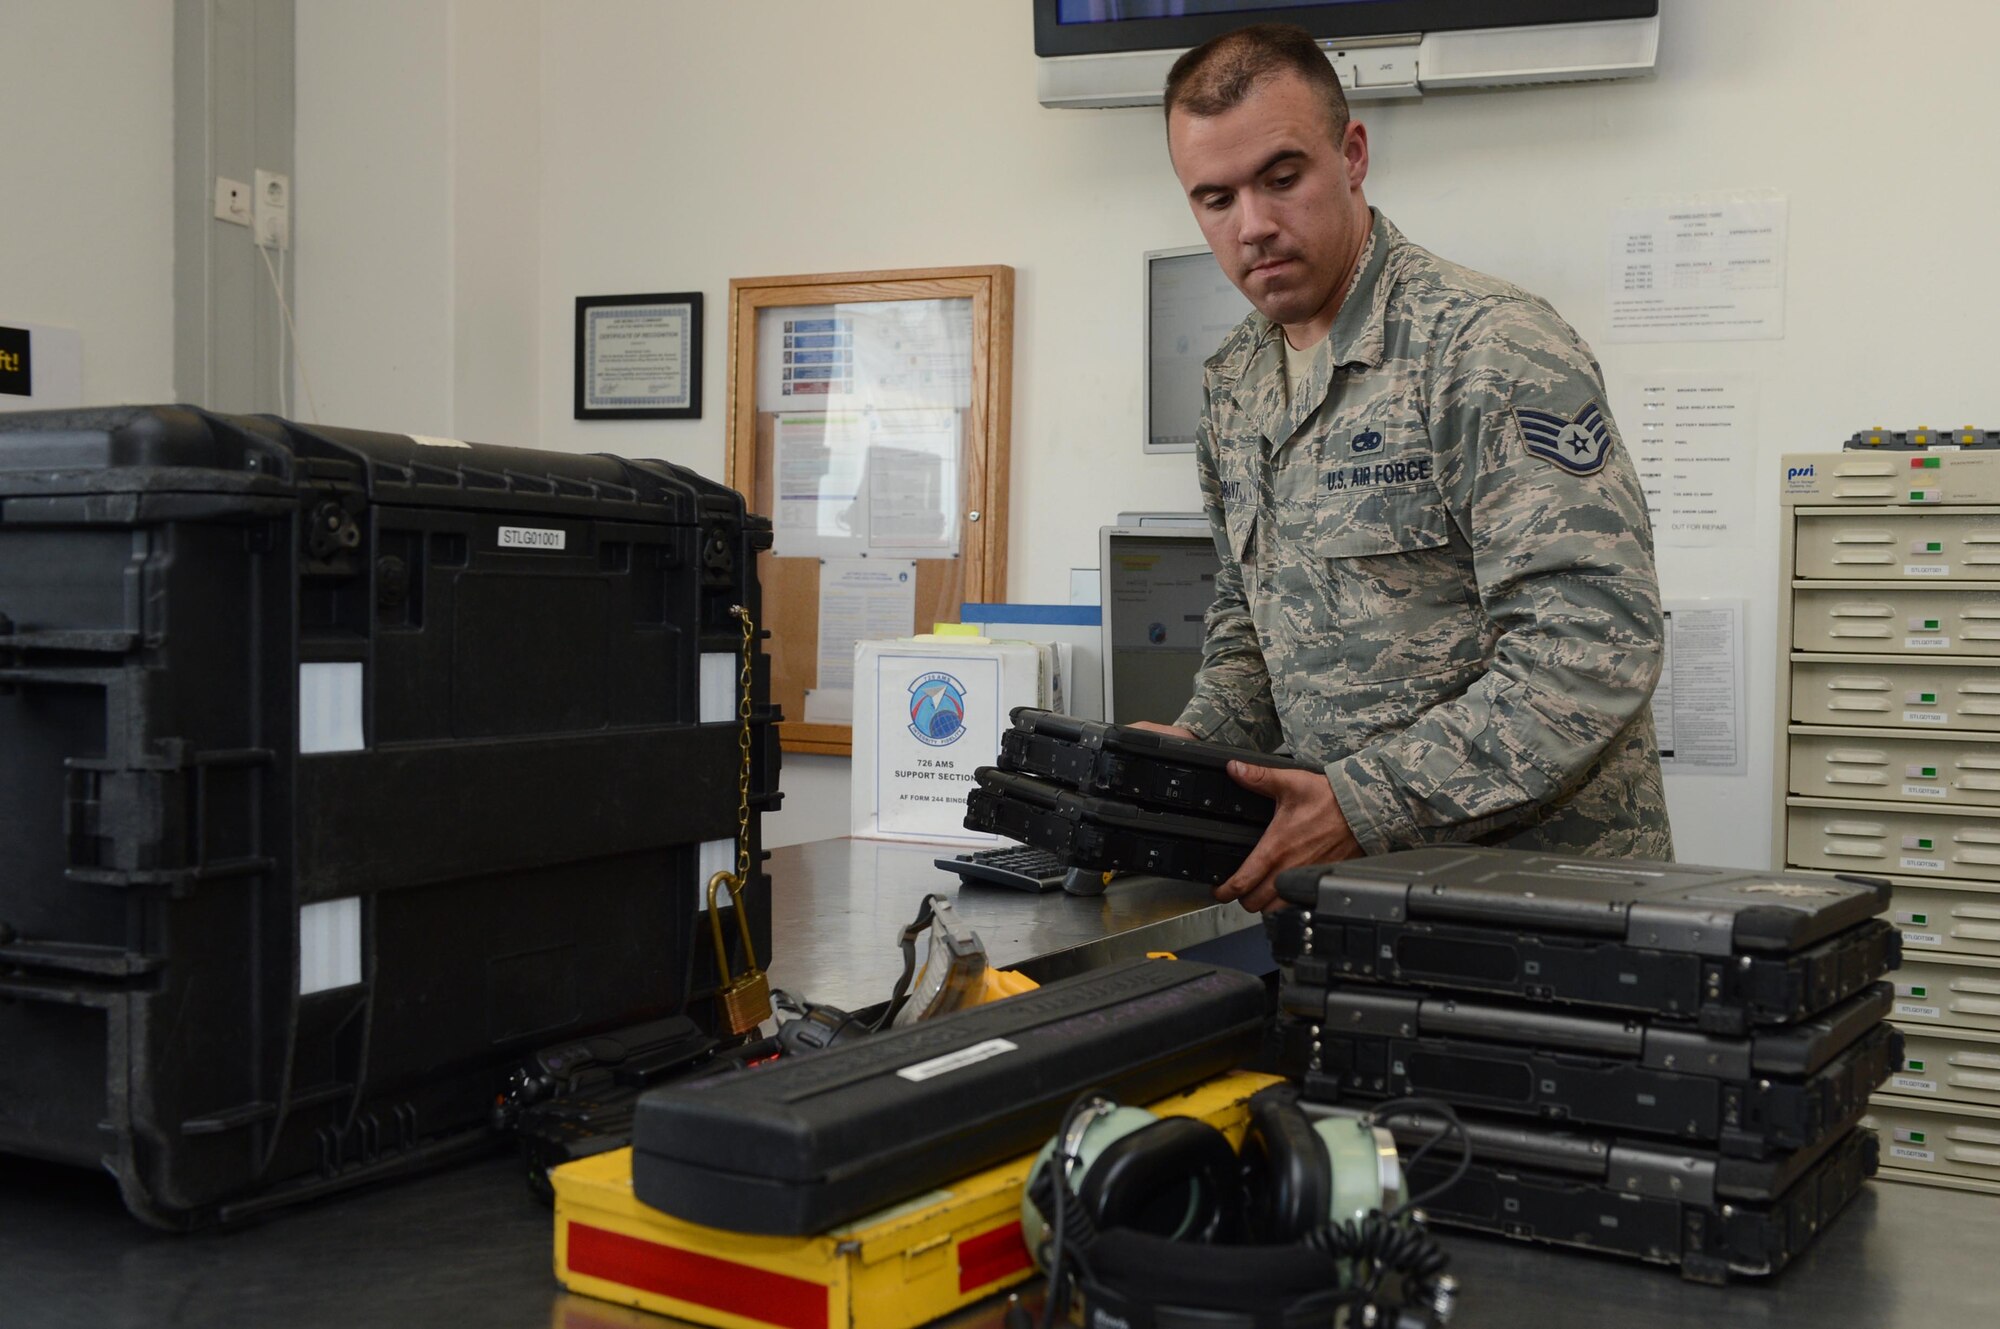 SPANGDAHLEM AIR BASE, Germany – U.S. Air Force Staff Sgt. Jeffrey Brant, 726th Air Mobility Squadron composite tool kit custodian from Millerton Pa., collects equipment that was checked out to maintainers Aug. 13, 2013. Aircraft maintenance units are responsible for servicing, inspecting, maintaining, launching and recovering aircraft. (U.S. Air Force photo by Airman 1st Class Kyle Gese/Released)
